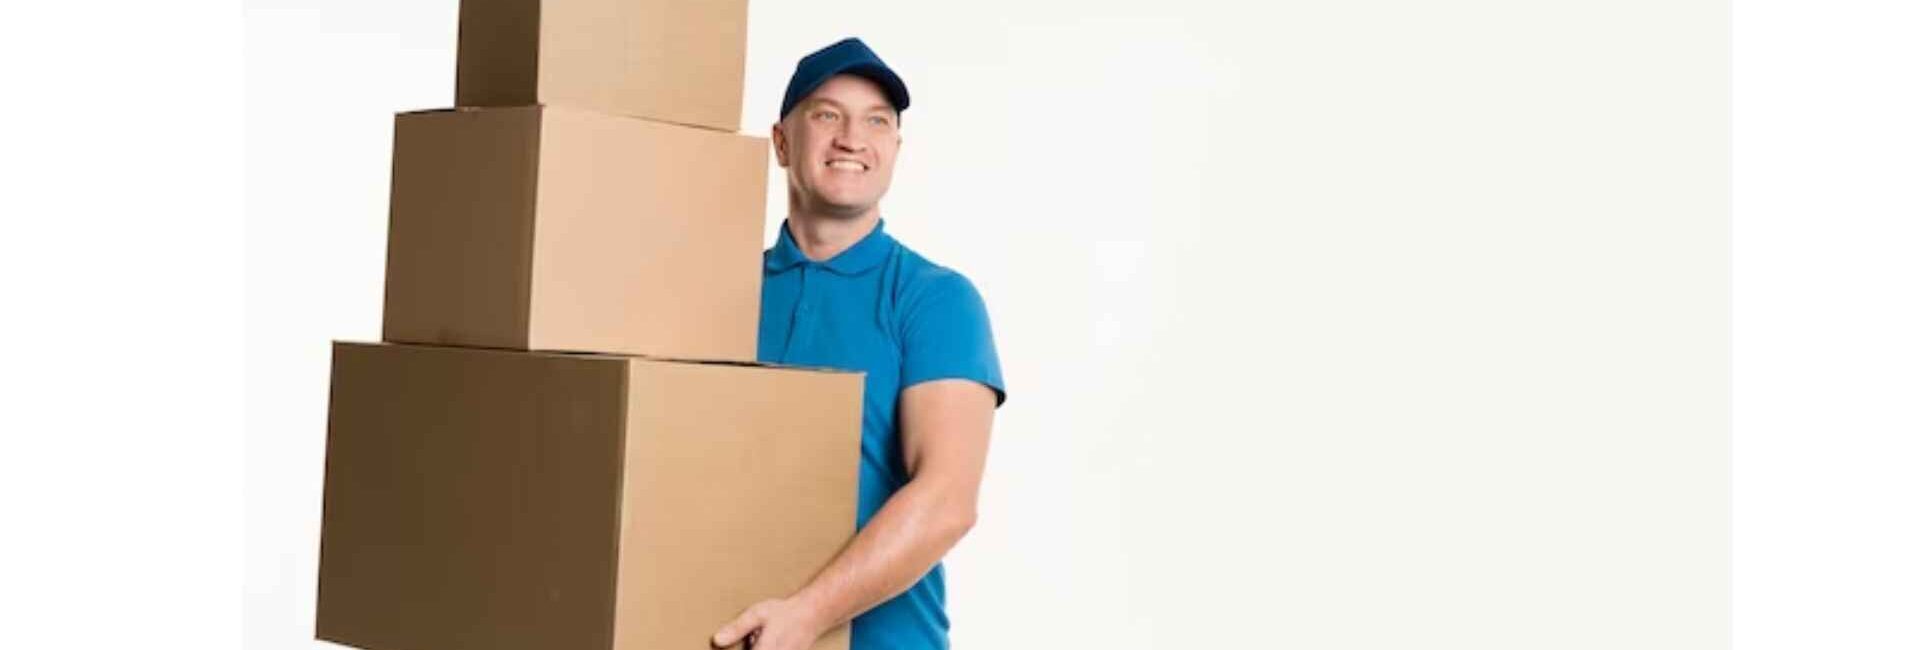 New Krishna Packers and Movers - Expert Packers and Movers in Noida